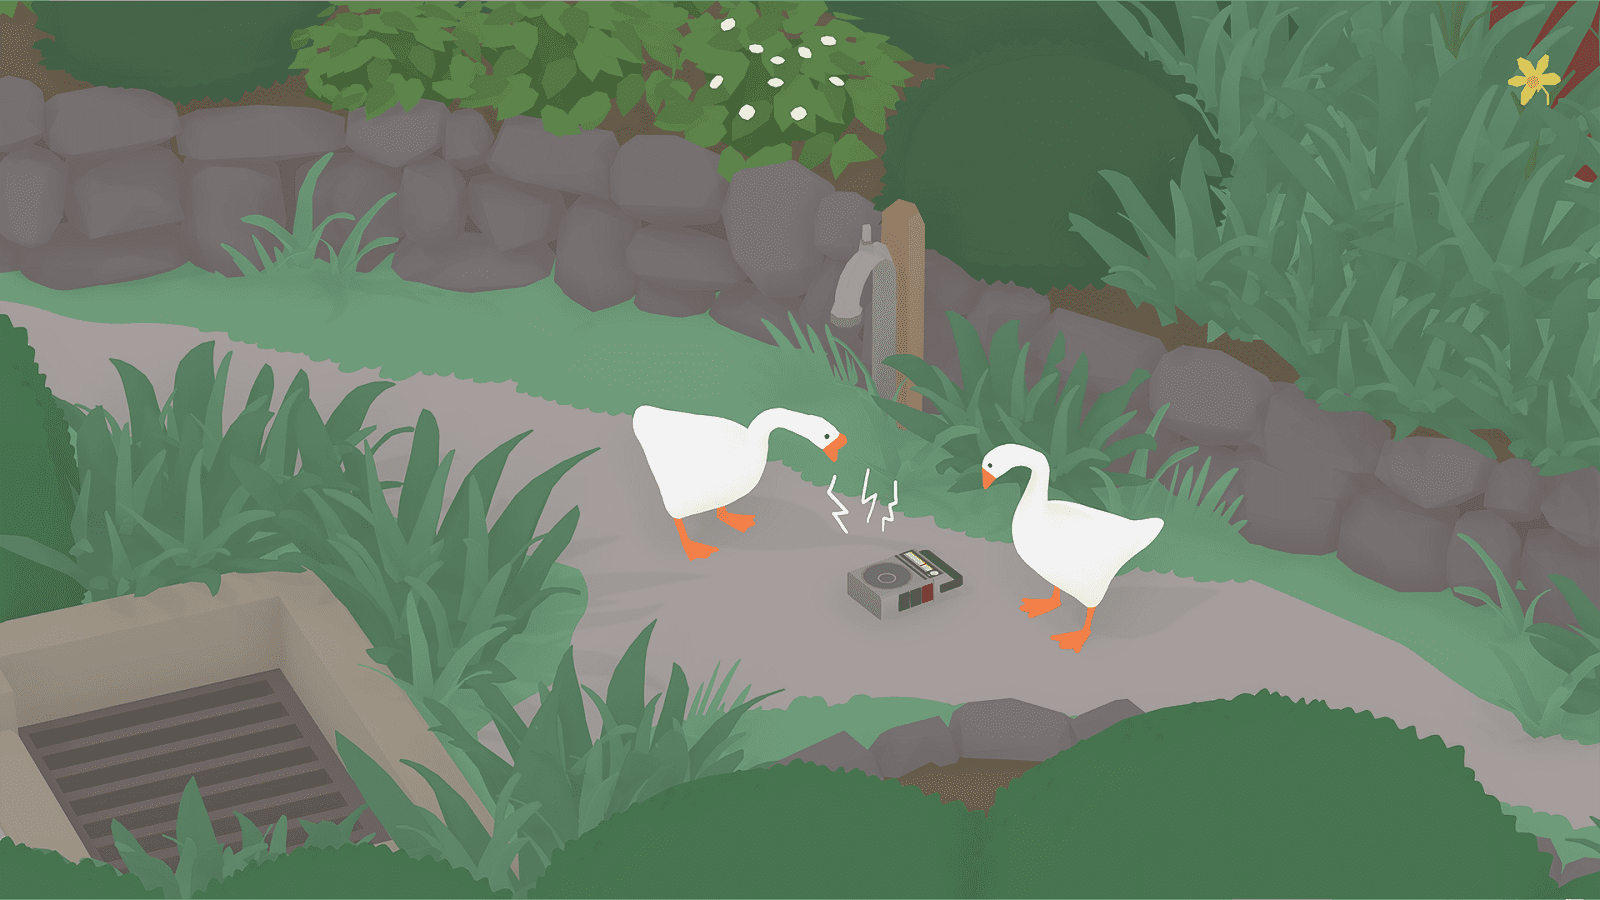 Untitled Goose Game, House House, iam8bit, Skybound Games